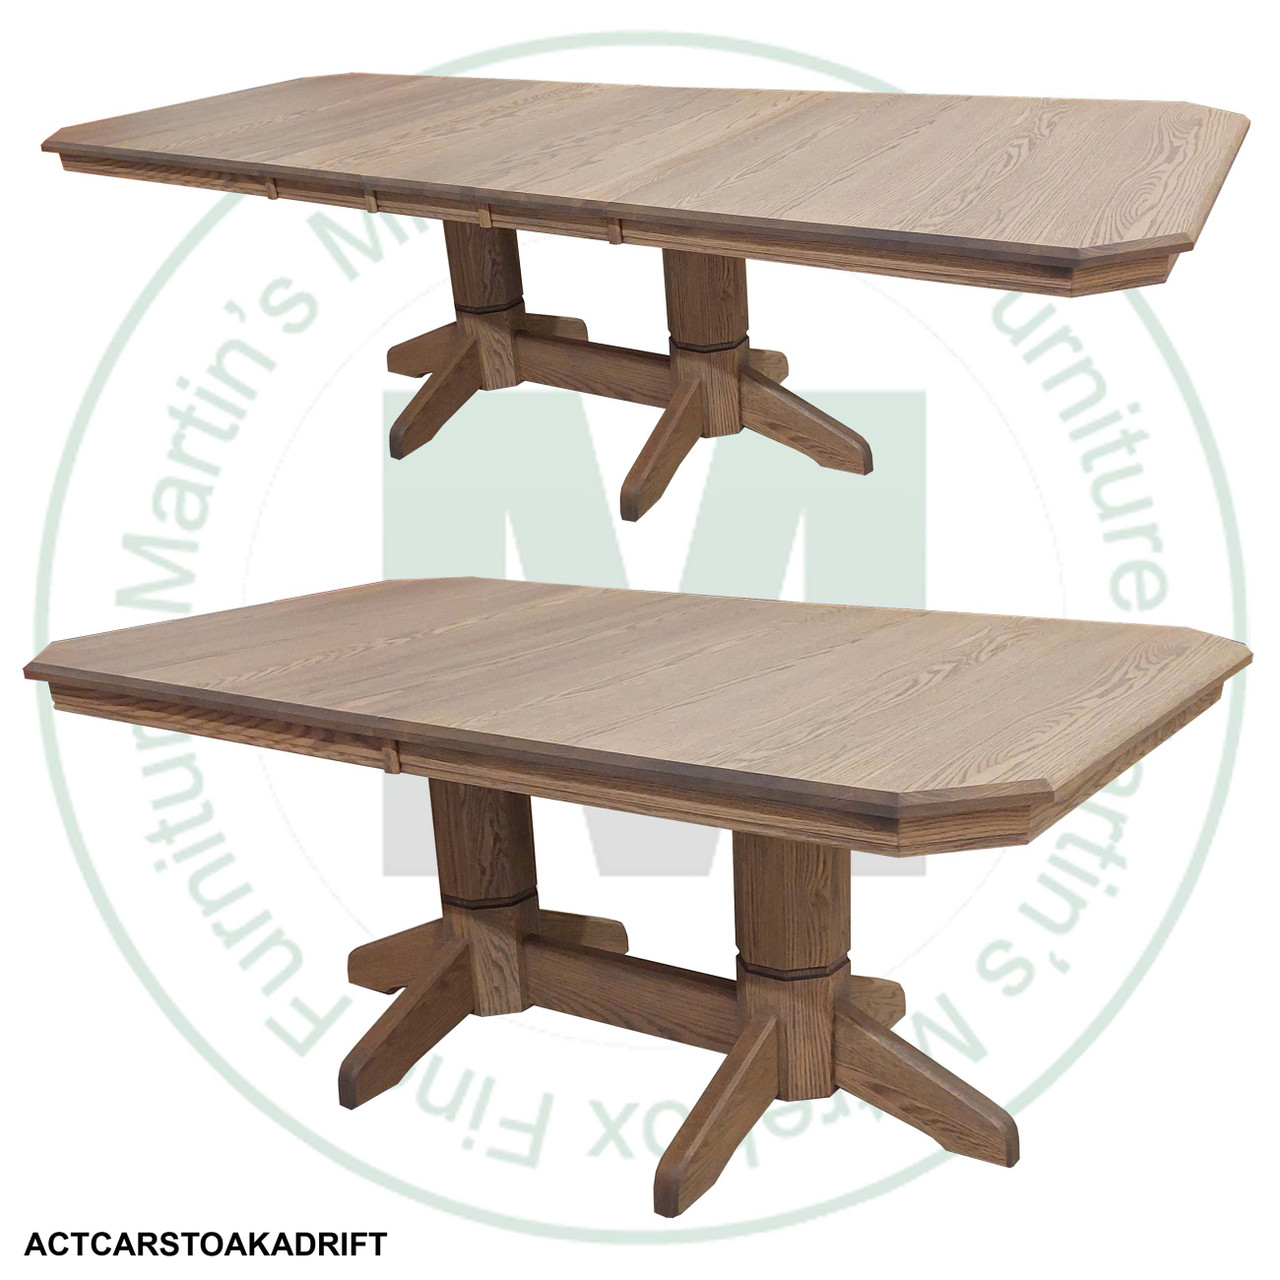 Oak Urban Classic Double Pedestal Table 42''D x 84''W x 30''H With 3 - 12'' Leaves